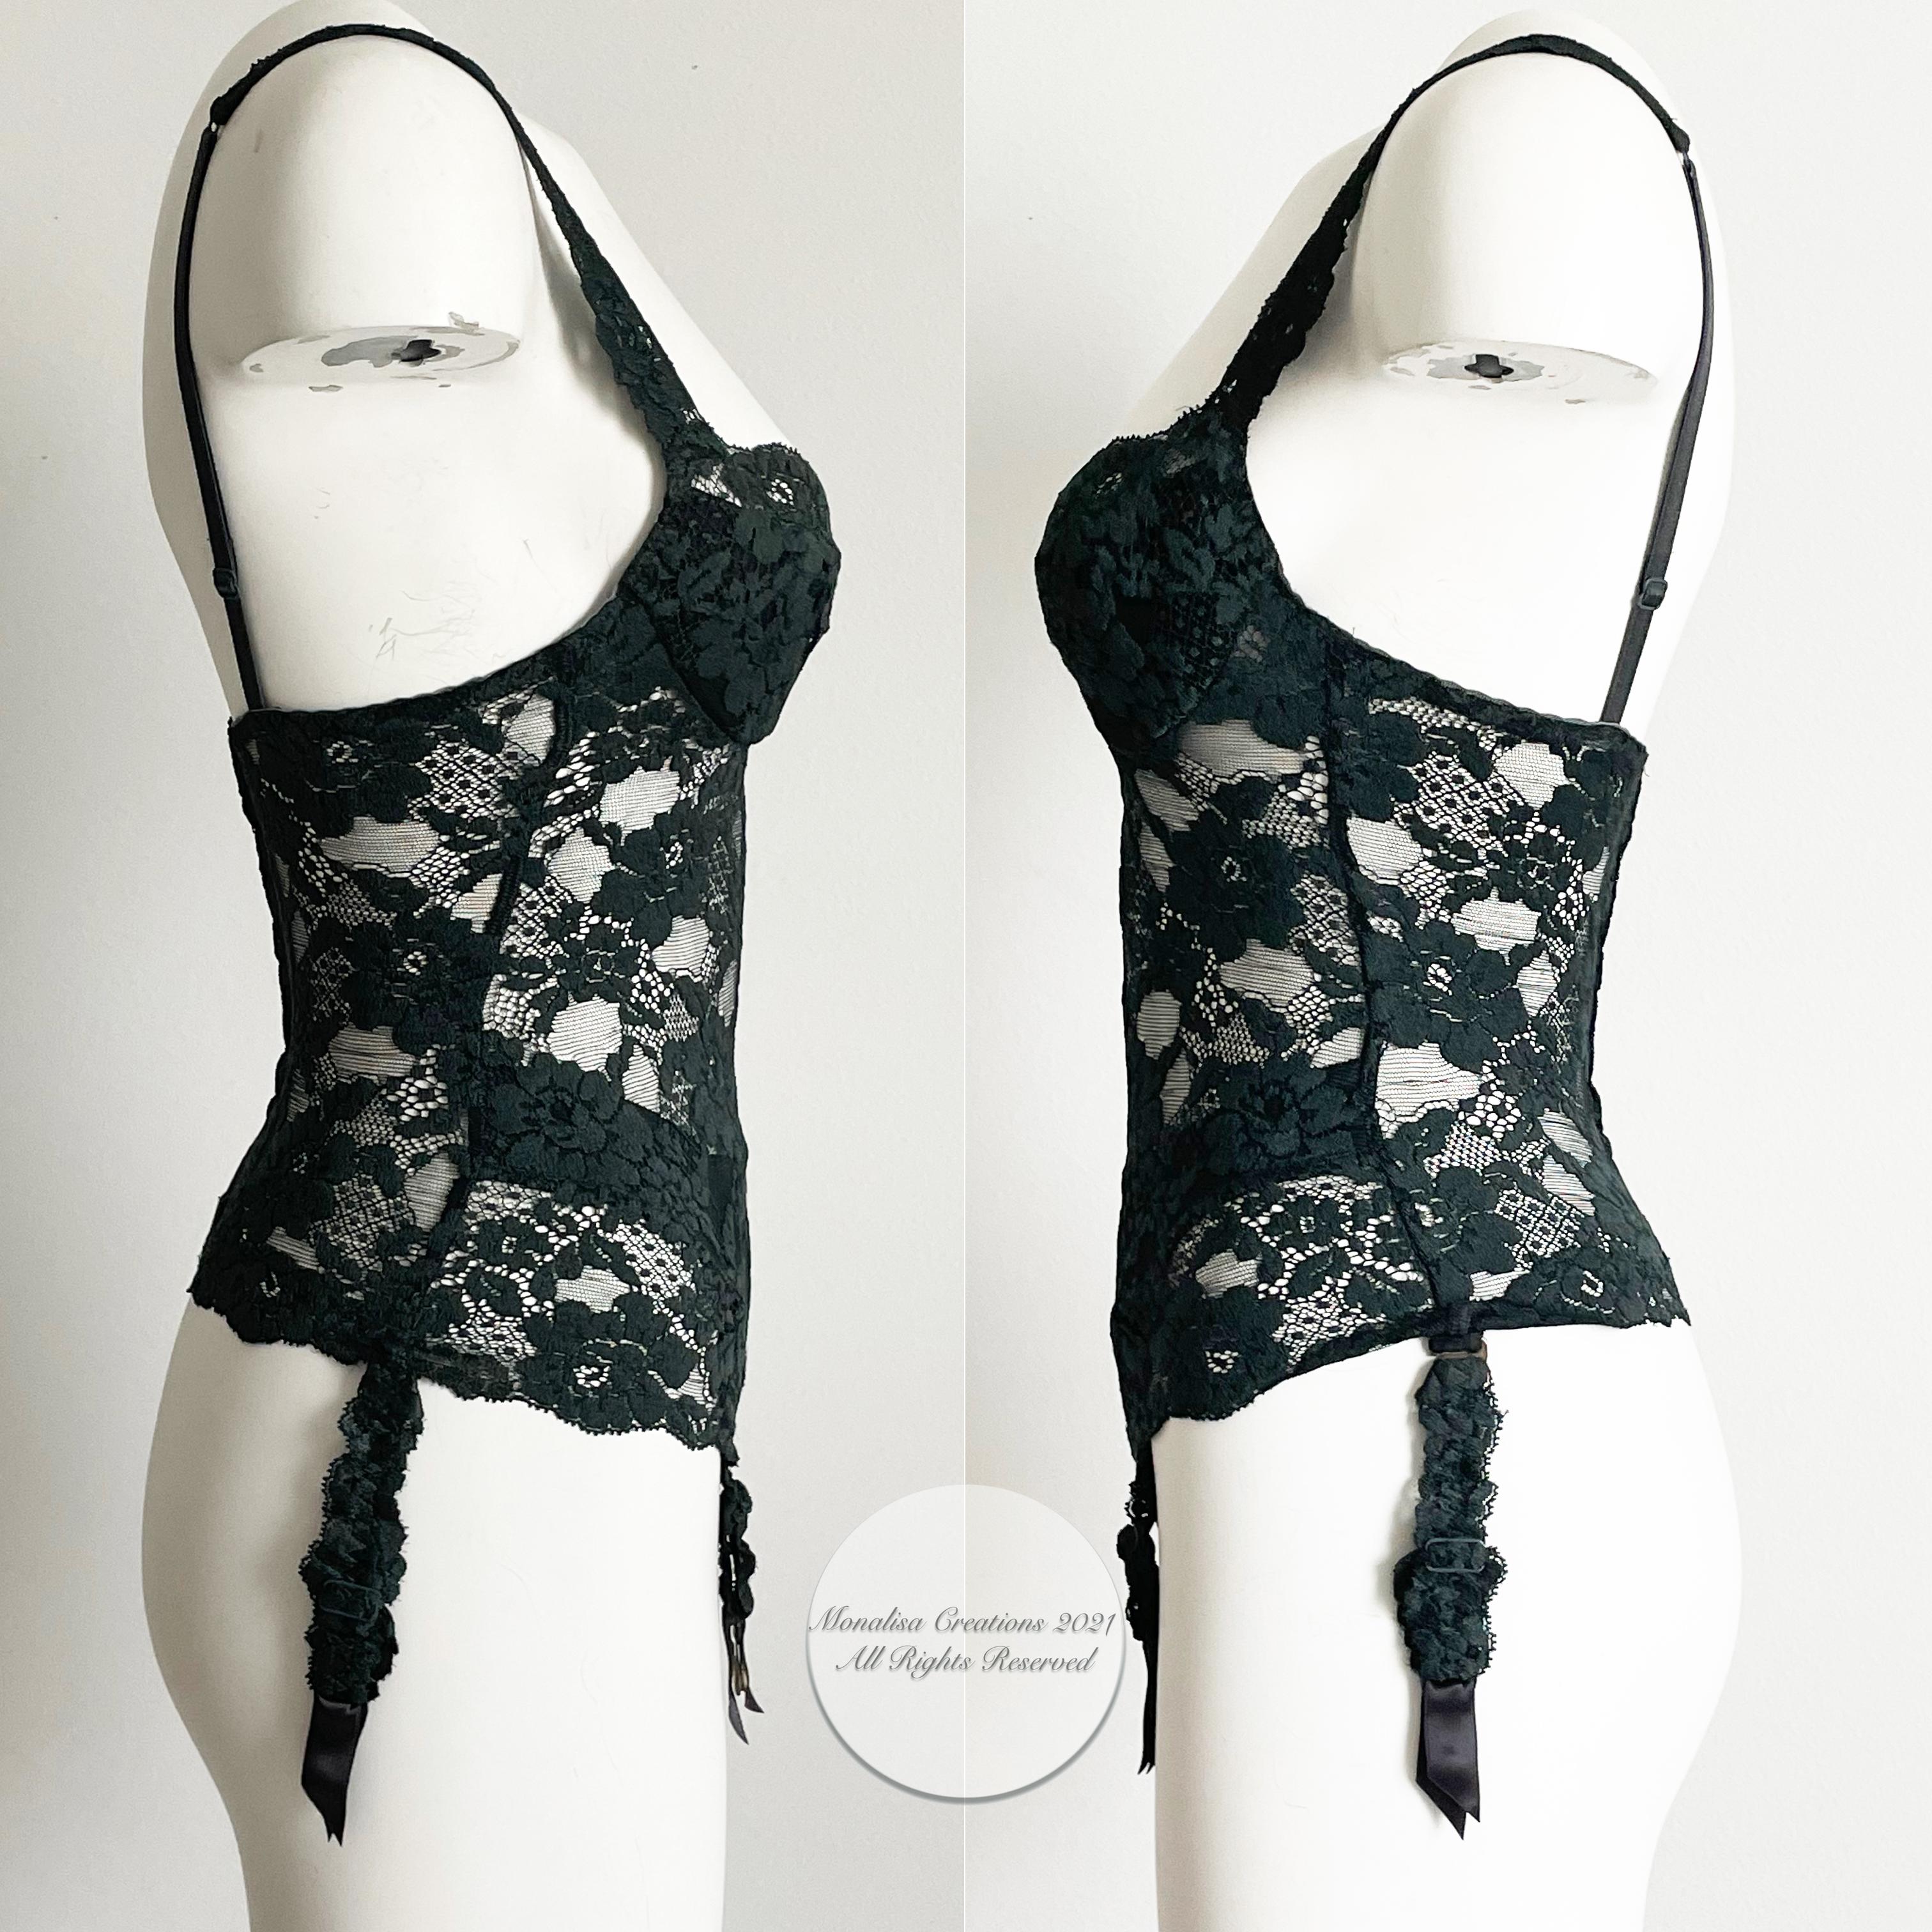 Black La Perla Body Suit with Garter Straps Floral Lace New With Tags 2003 NOS Size 34